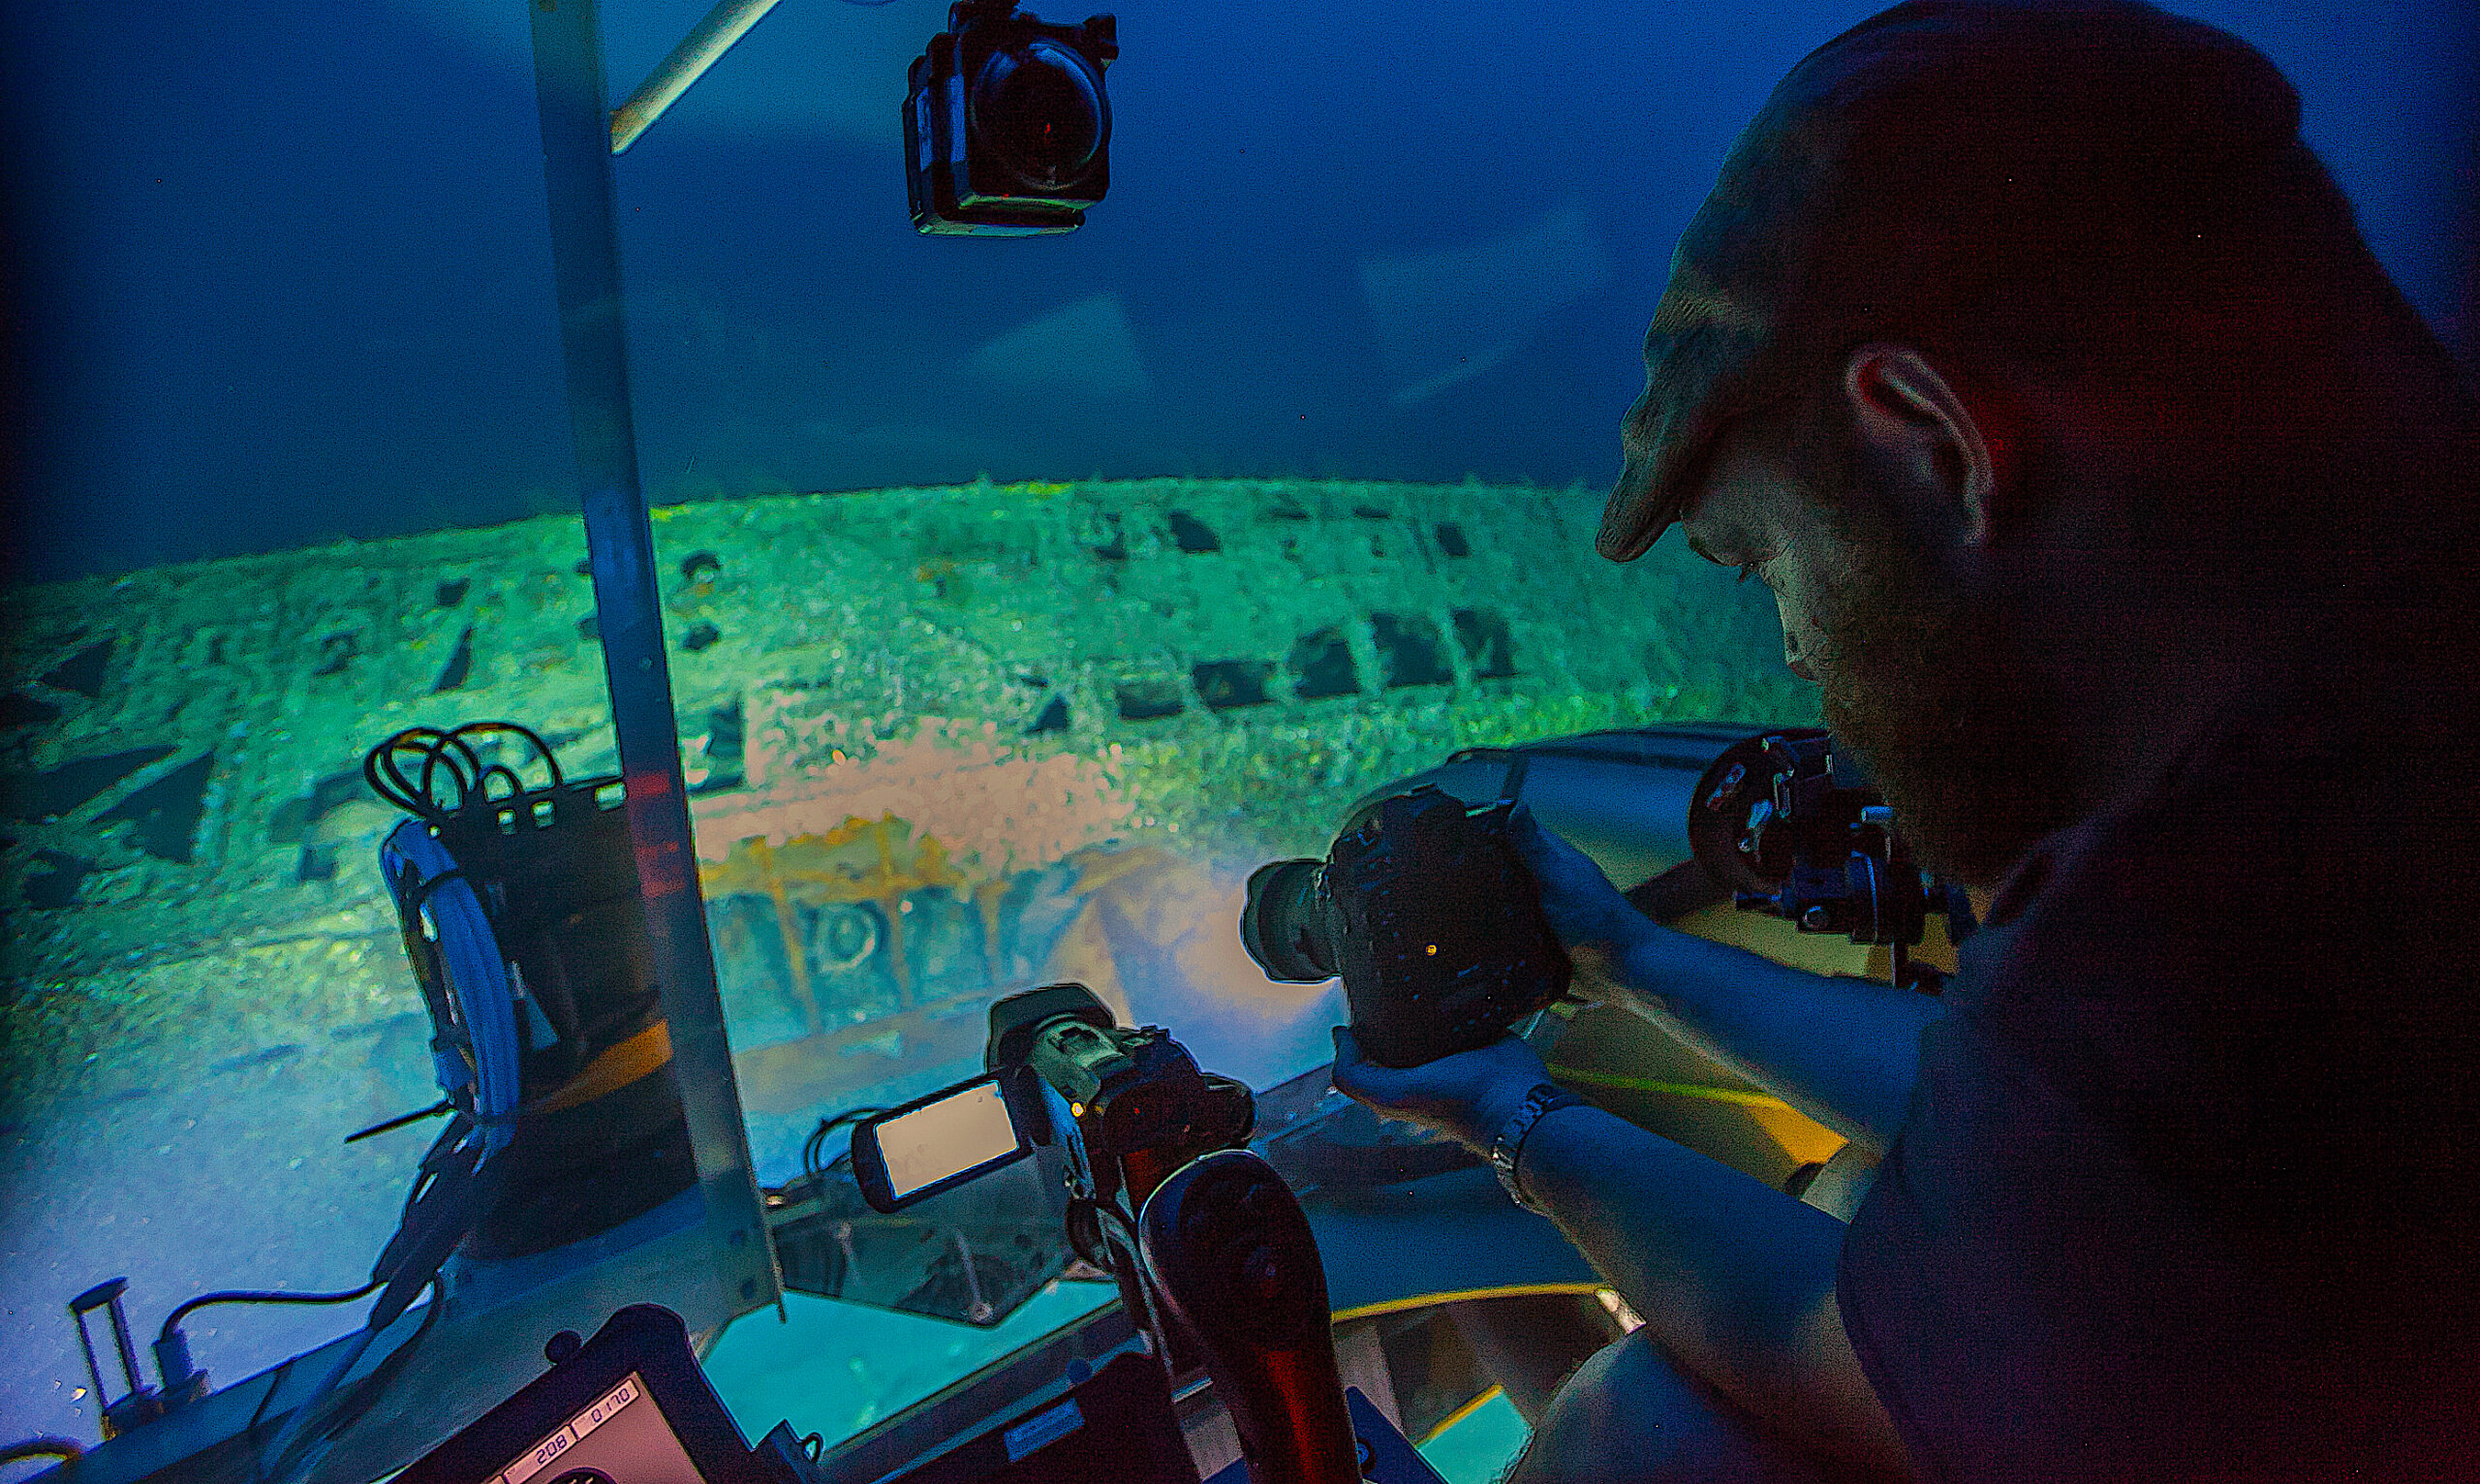 Joe Hoyt, Maritime Archaeologist with the NOAA Office of National Marine Sanctuaries, takes photos of the shipwreck from the submersible. Image courtesy of Carmichael, Project Baseline - Battle of the Atlantic expedition.